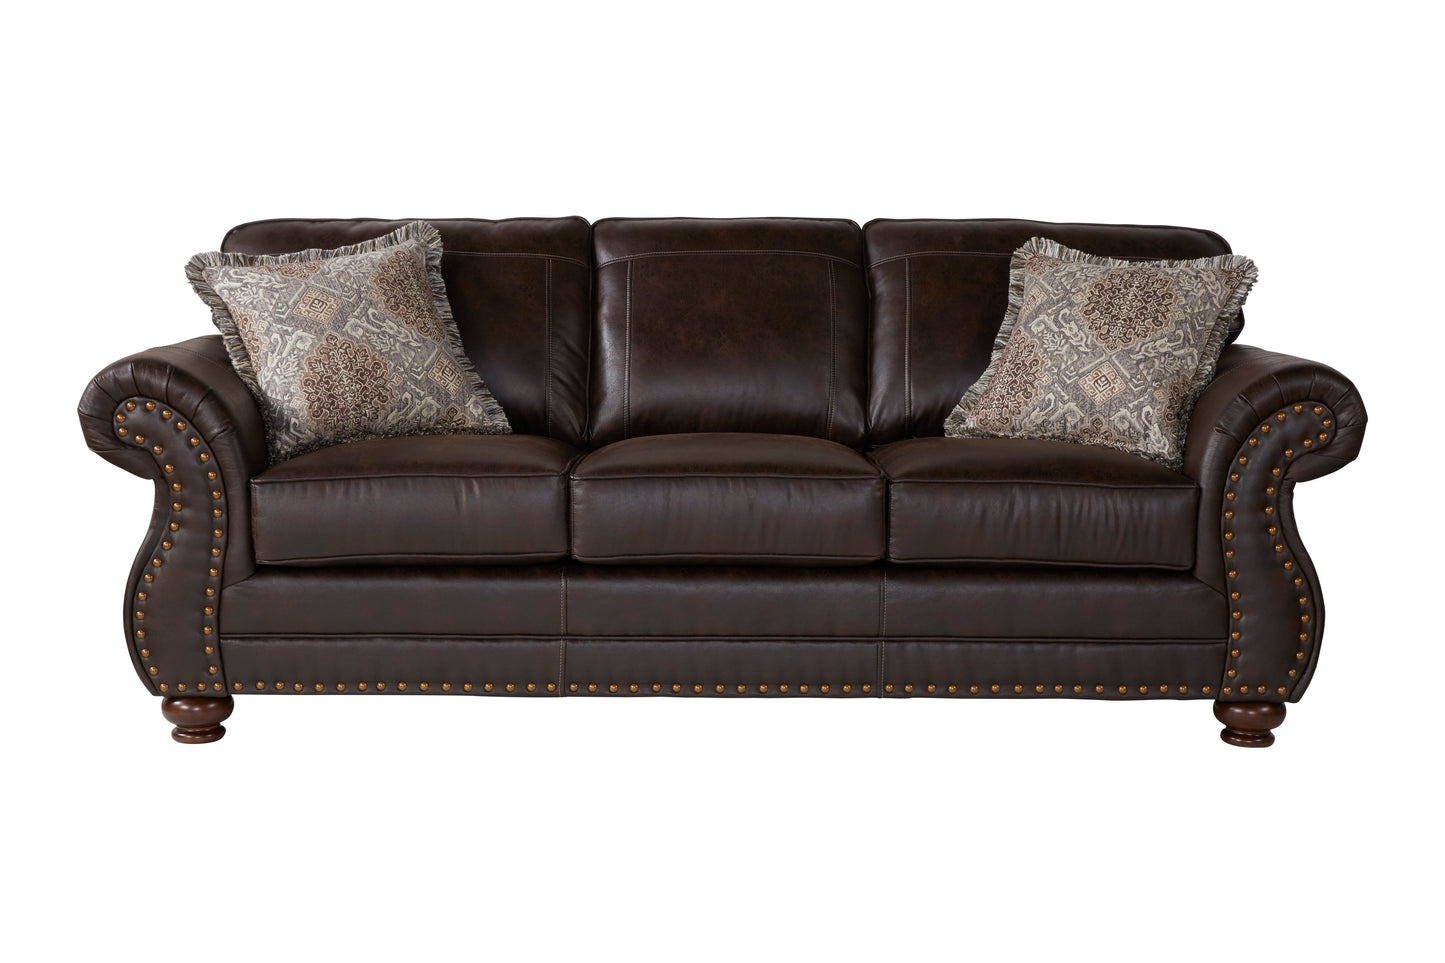 Leinster Faux Leather Upholstered Nailhead Living Room Collection in Espresso